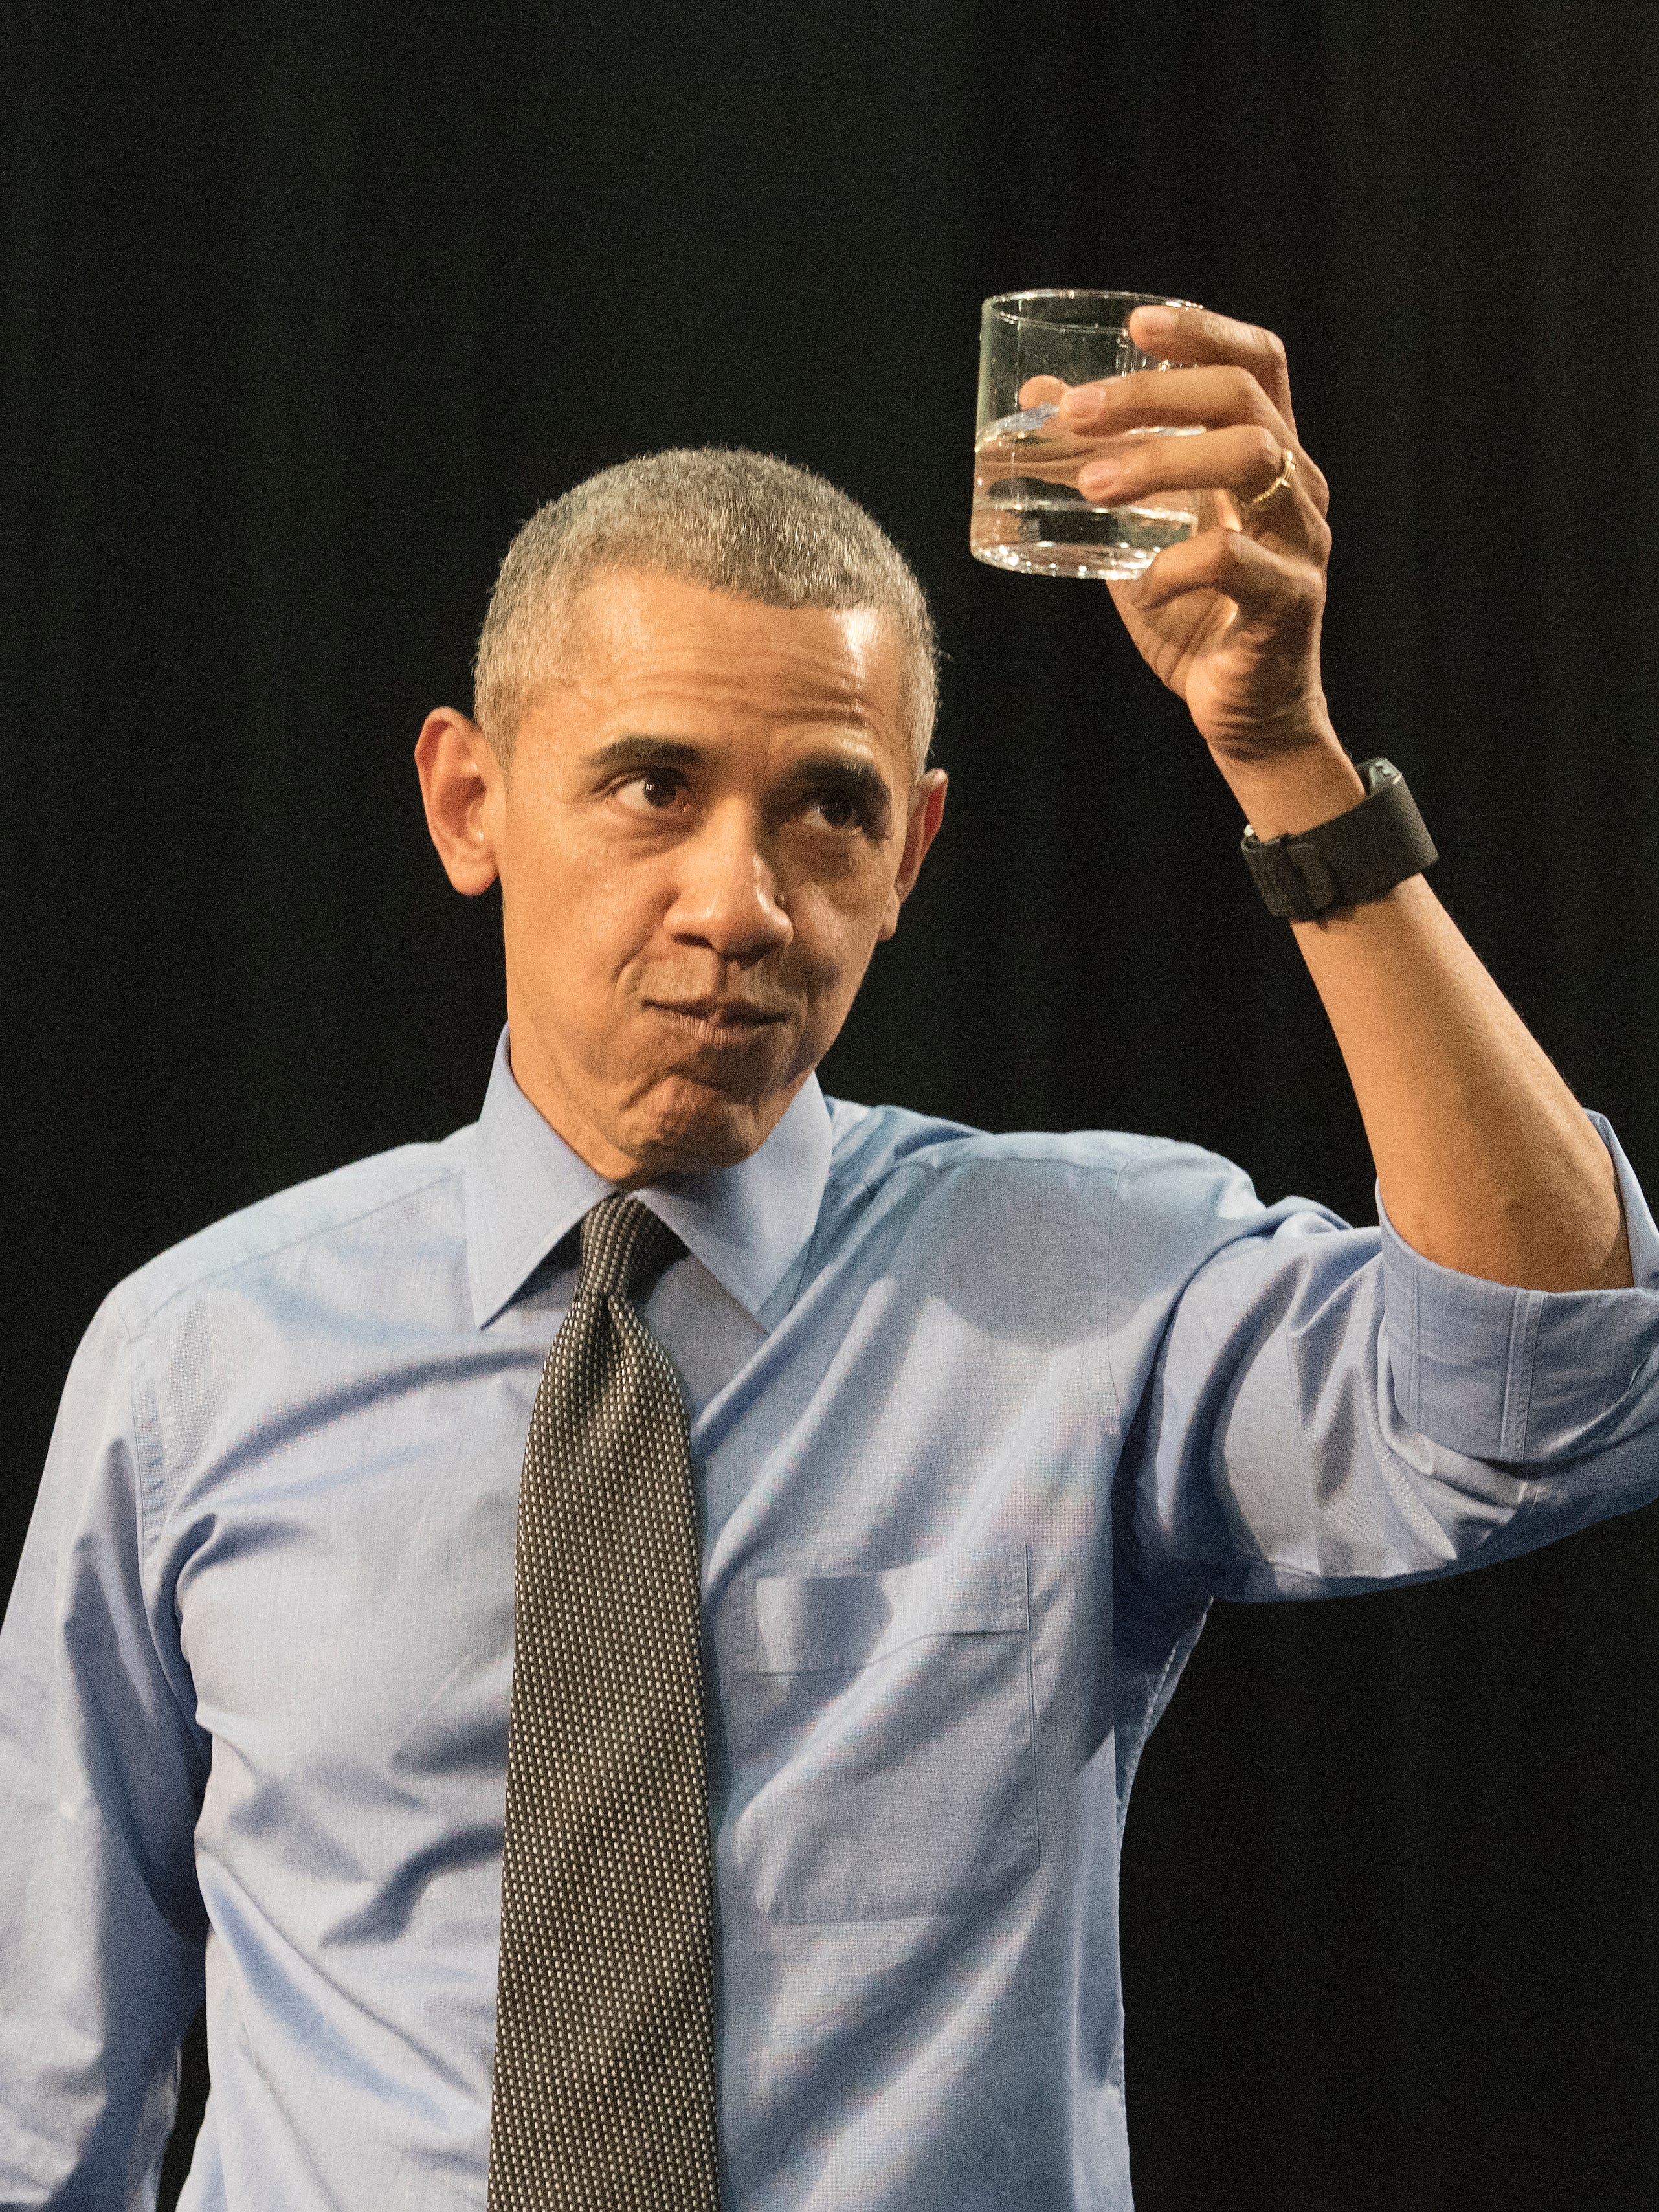 President Obama takes a drink of water he called for while at the podium. "I really did need a glass of water. This is not a stunt," he said.